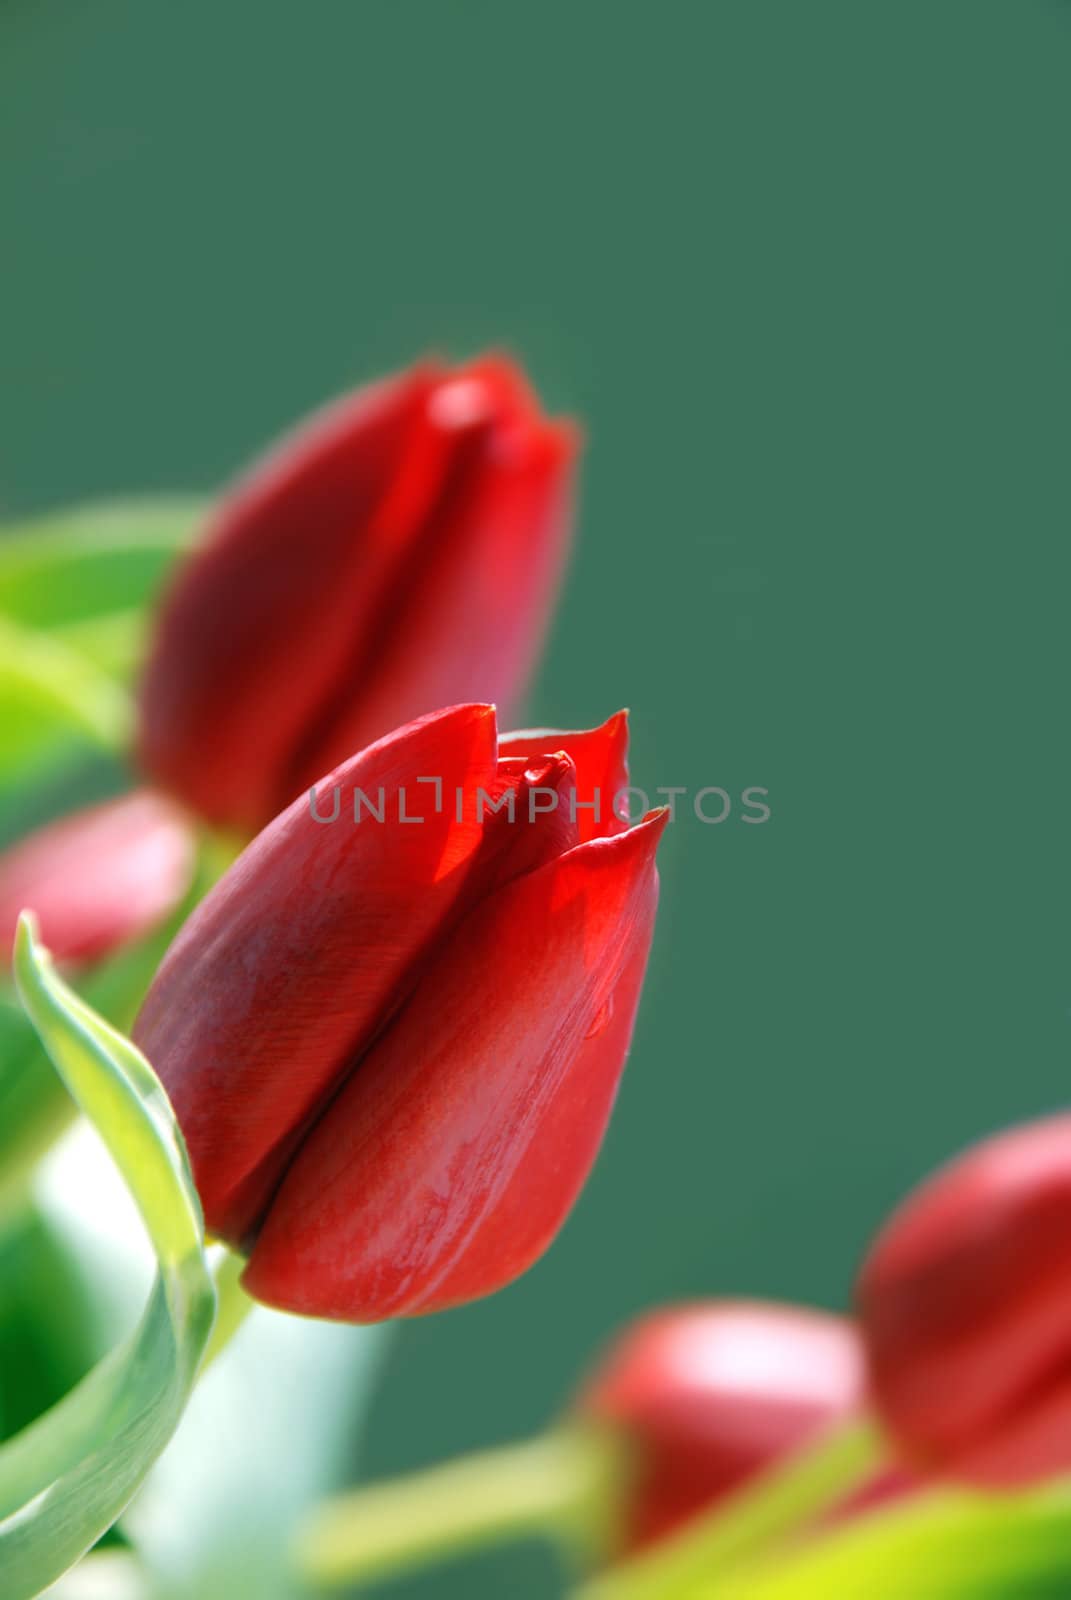 Tulips by Vac